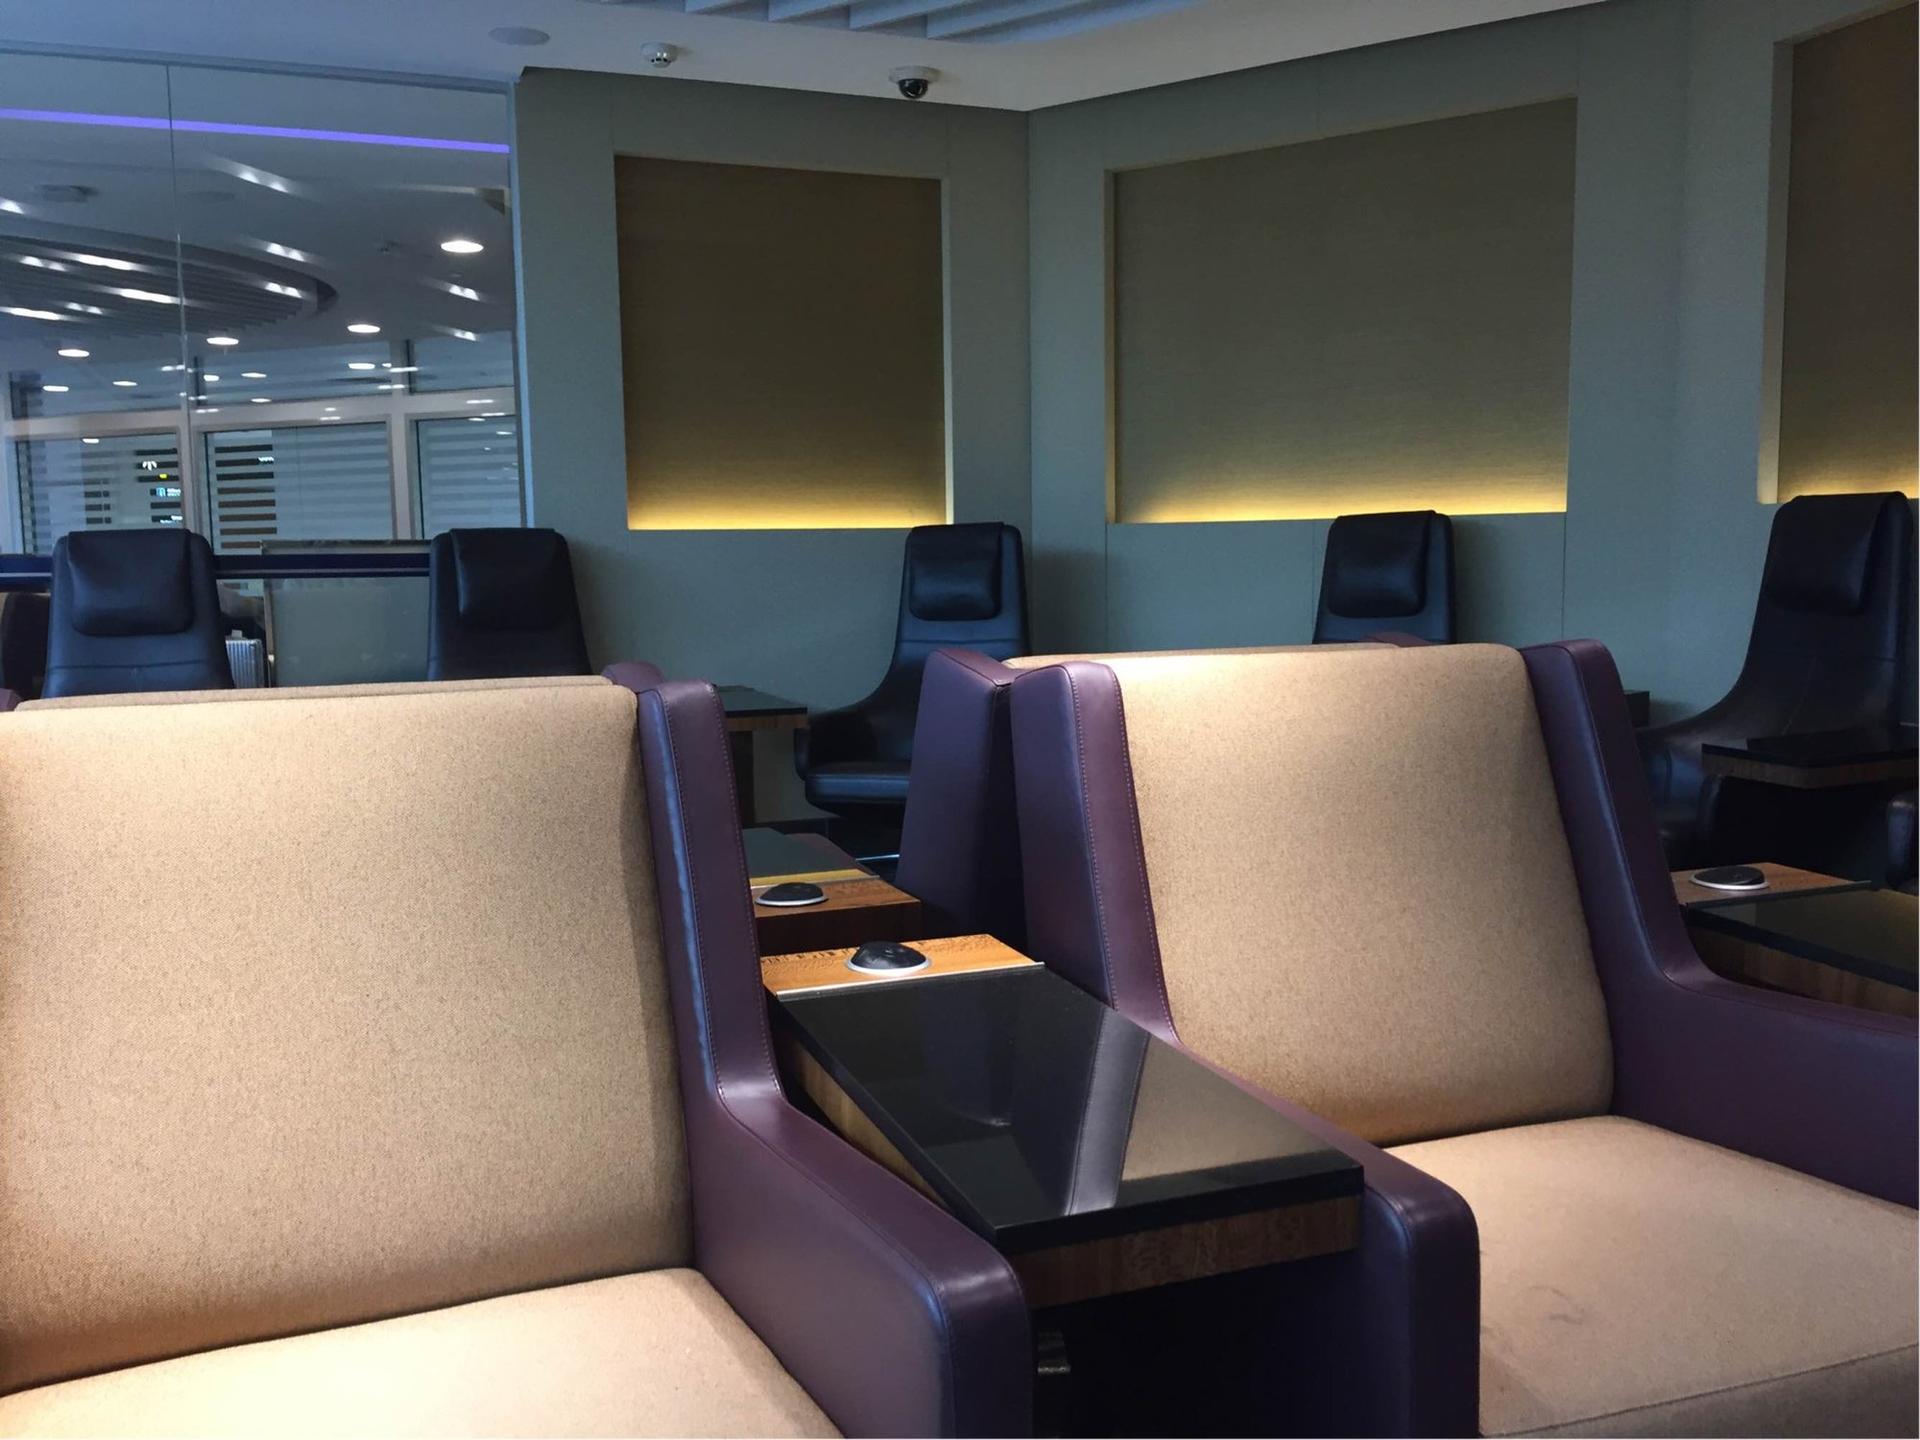 Singapore Airlines SilverKris Business Class Lounge image 3 of 7